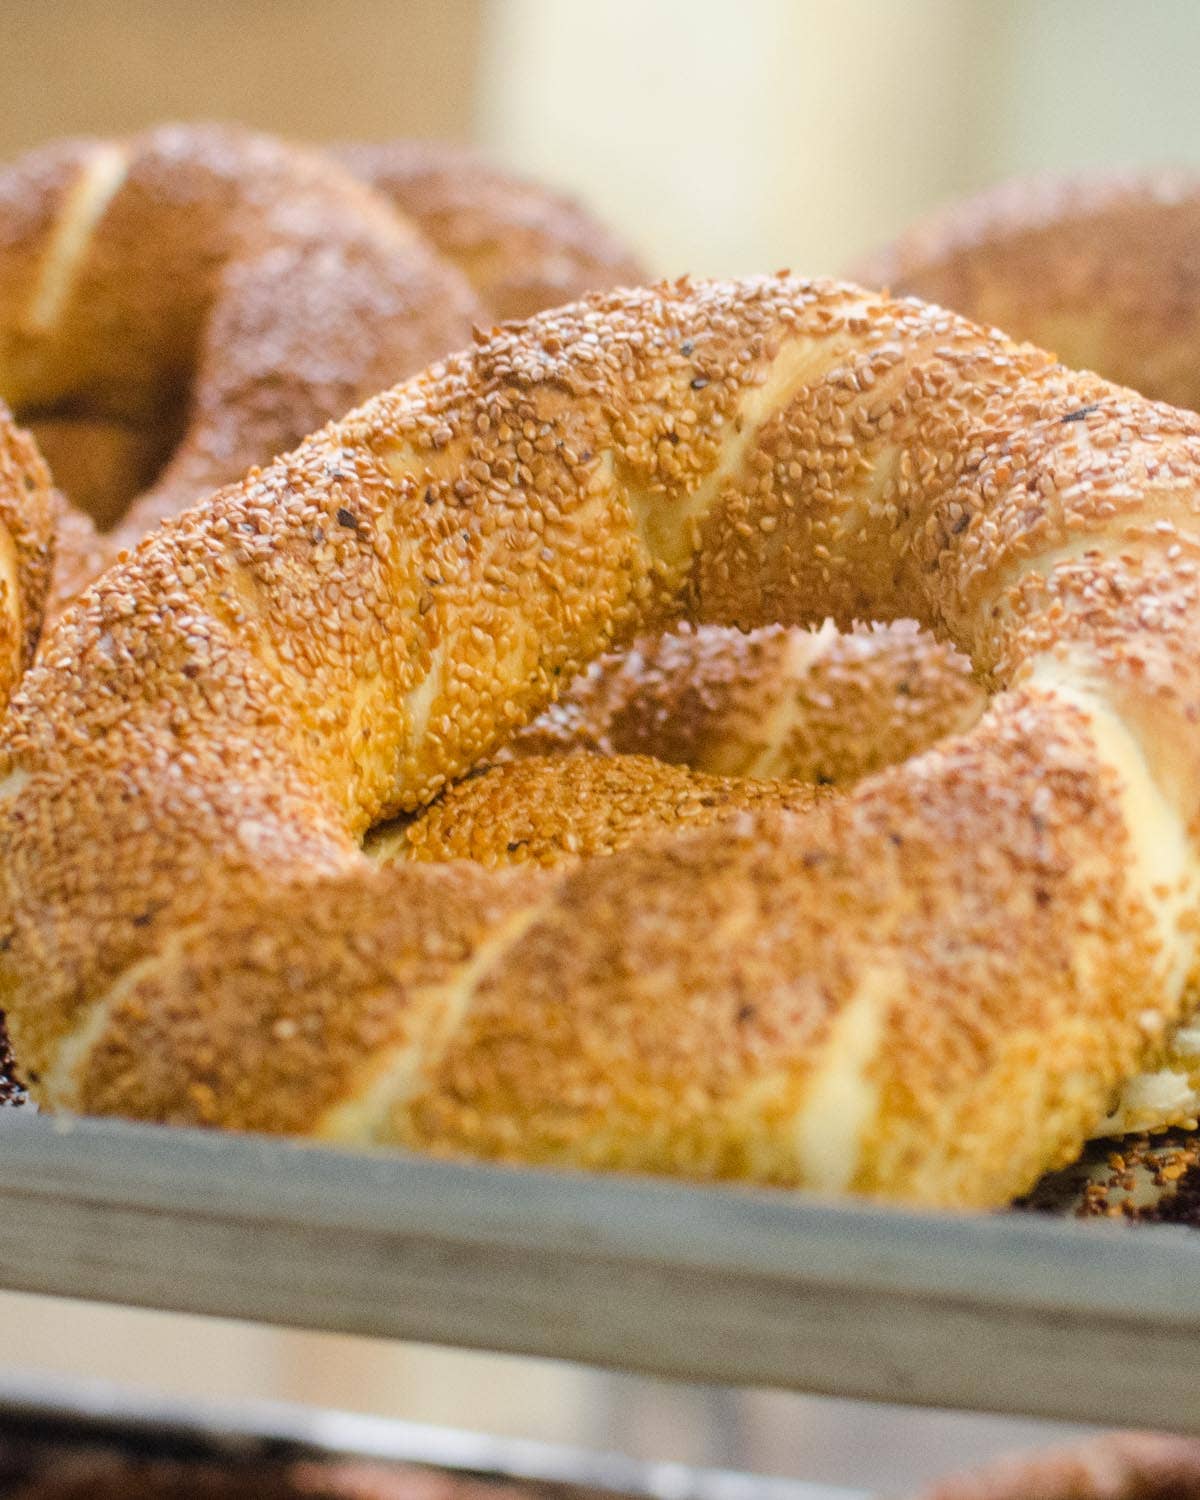 A Turkish Bakery is Here to Introduce Your New Favorite Breads